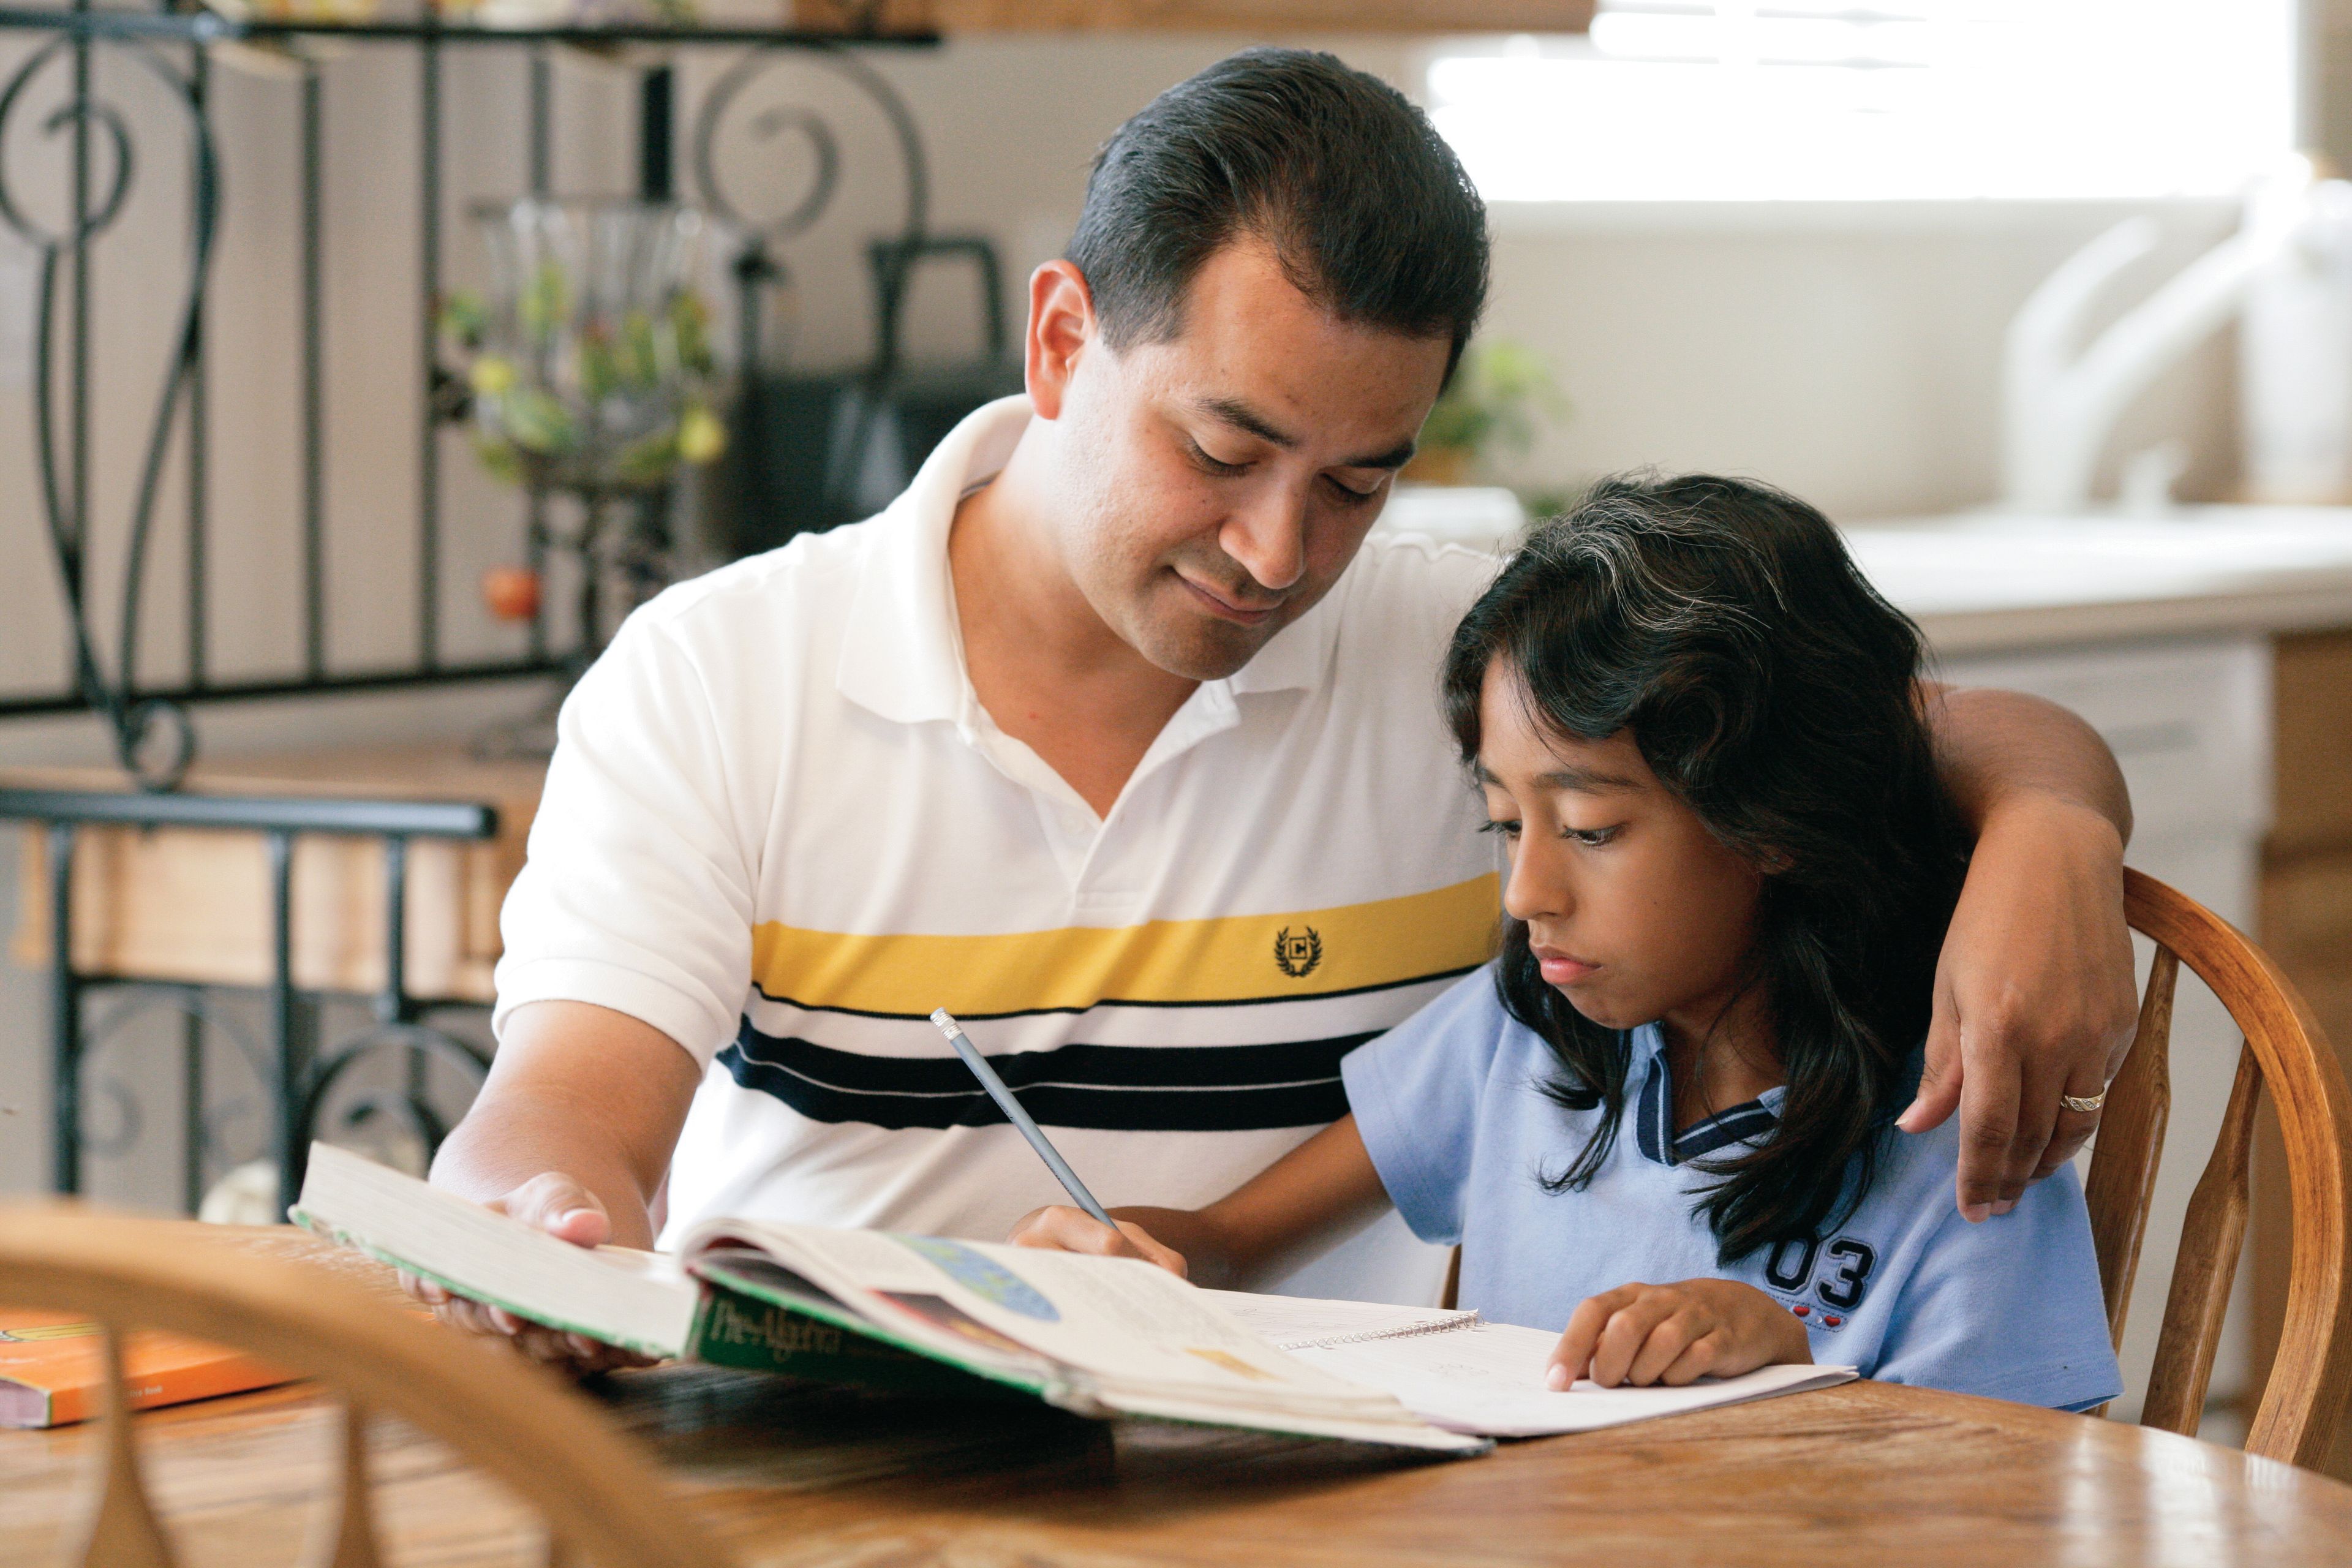 A father helps his daughter with her homework.